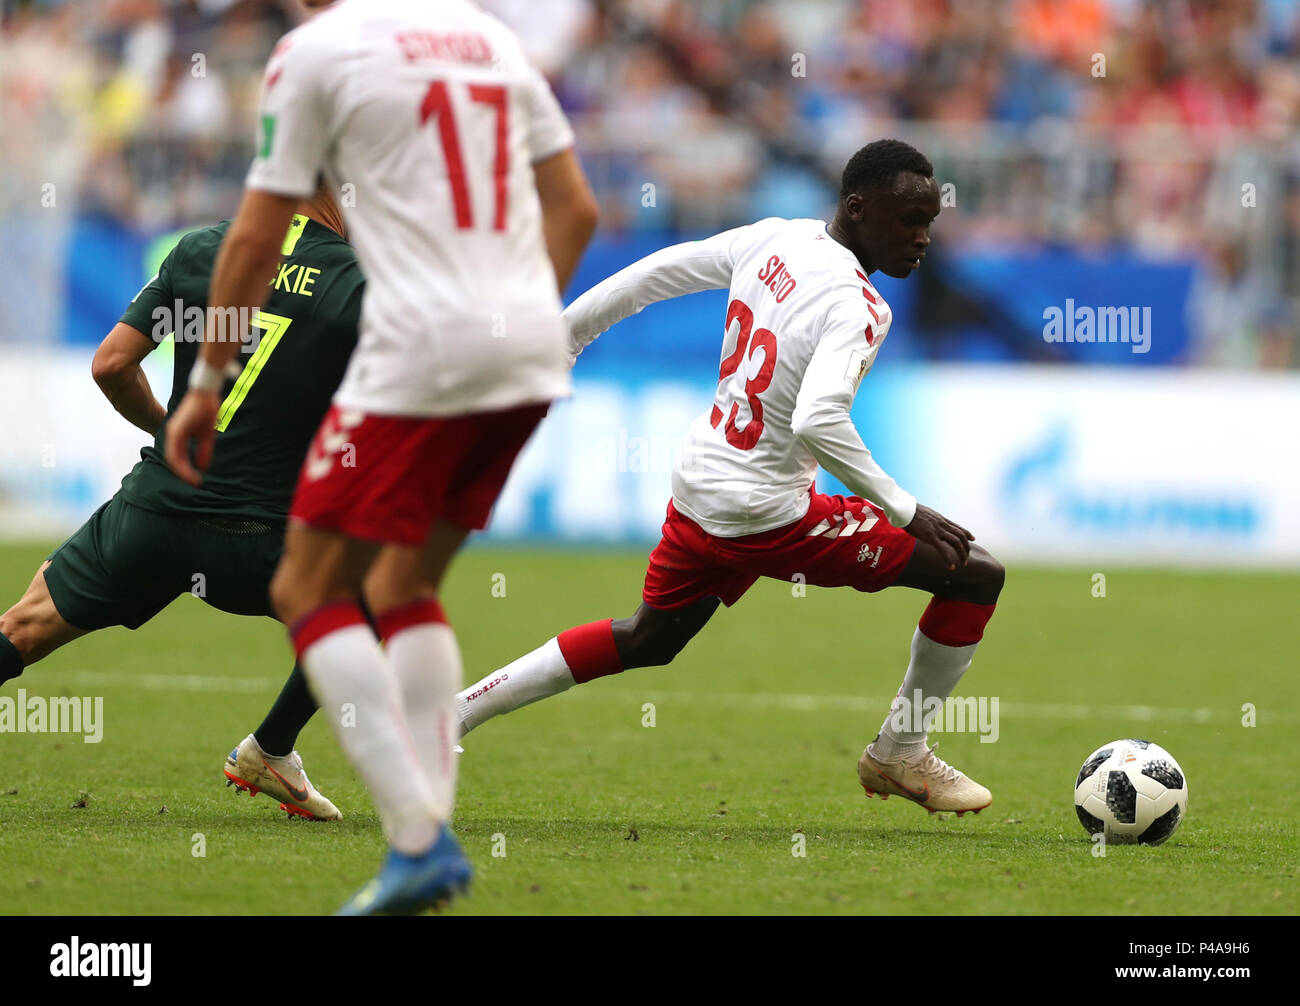 Samara, Russia. 21st June, 2018. Pione Sisto (R) of Denmark competes during the 2018 FIFA World Cup Group C match between Denmark and Australia in Samara, Russia, June 21, 2018. The match ended in a 1-1 draw. Credit: Fei Maohua/Xinhua/Alamy Live News Stock Photo